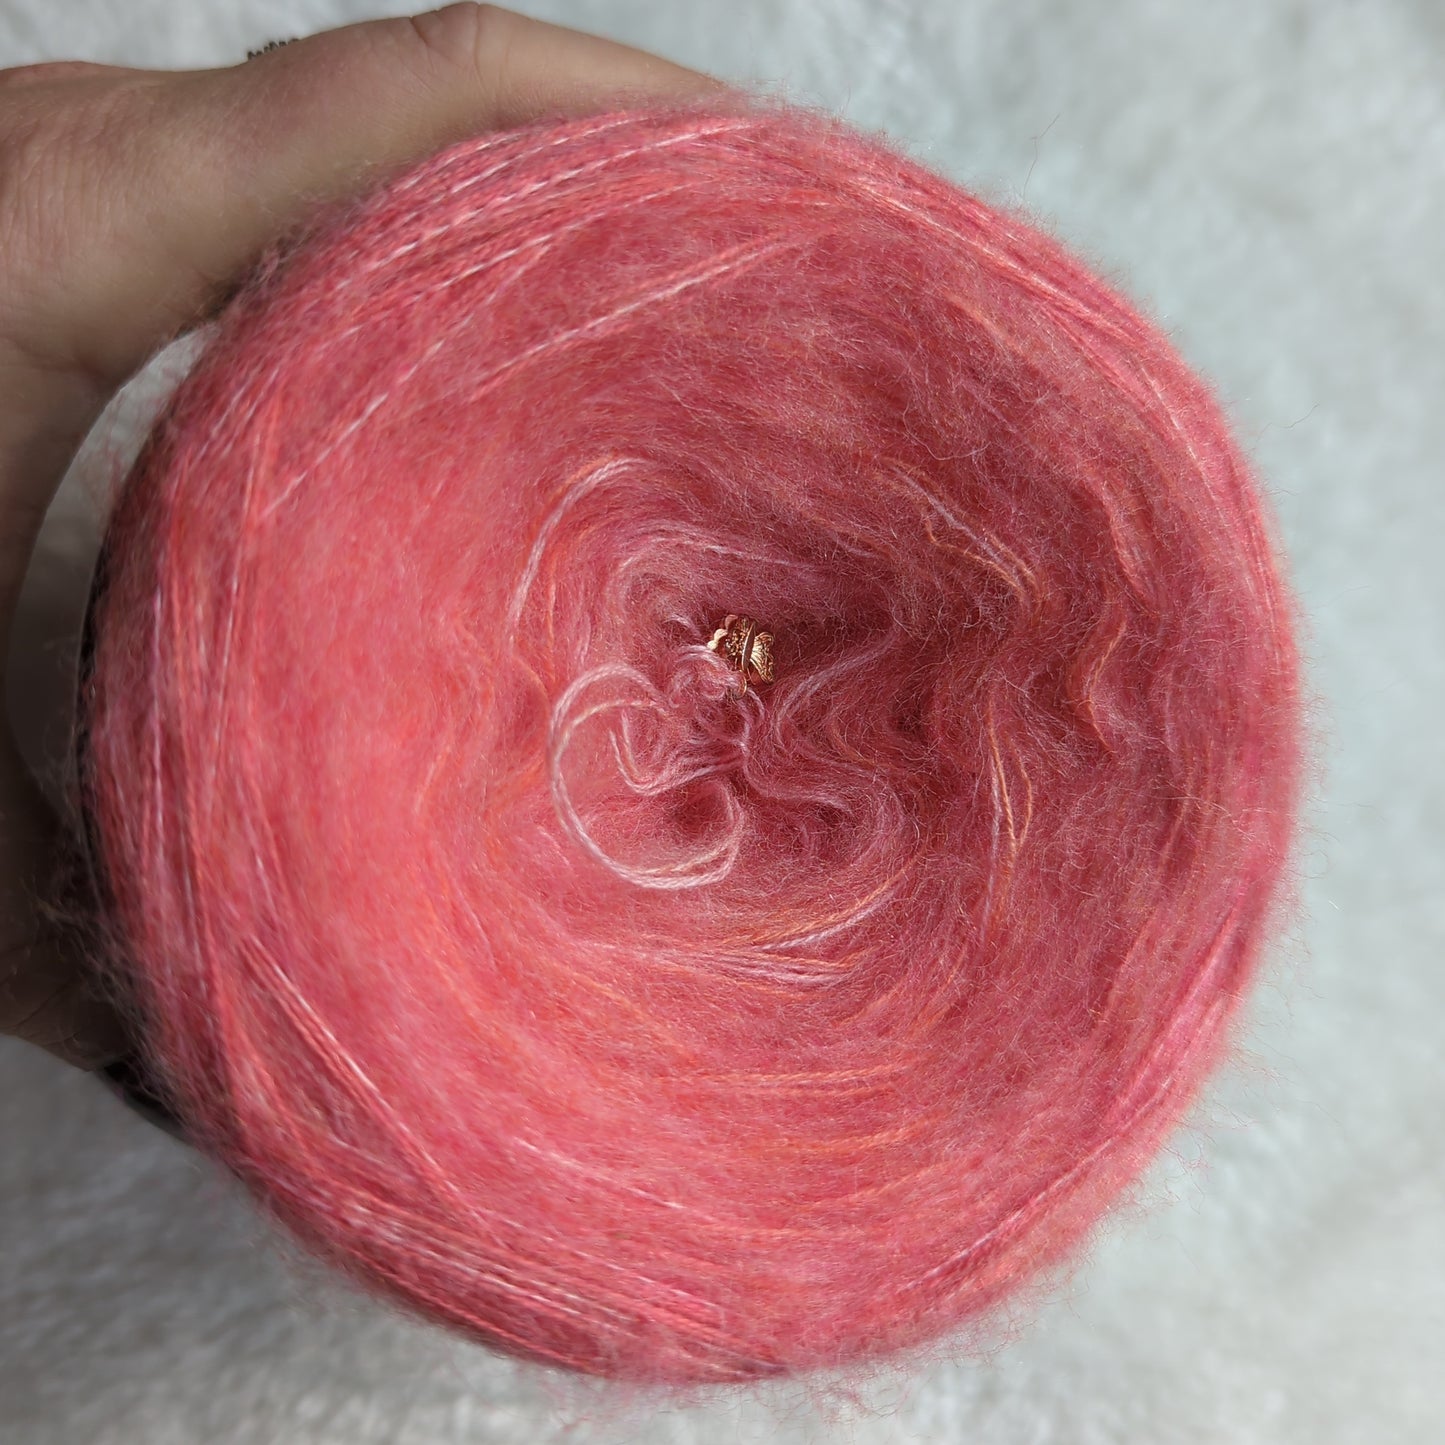 FC009 cotton/acrylic ombre yarn cake, 200g, about 750m, 2ply+ mohair mix thread